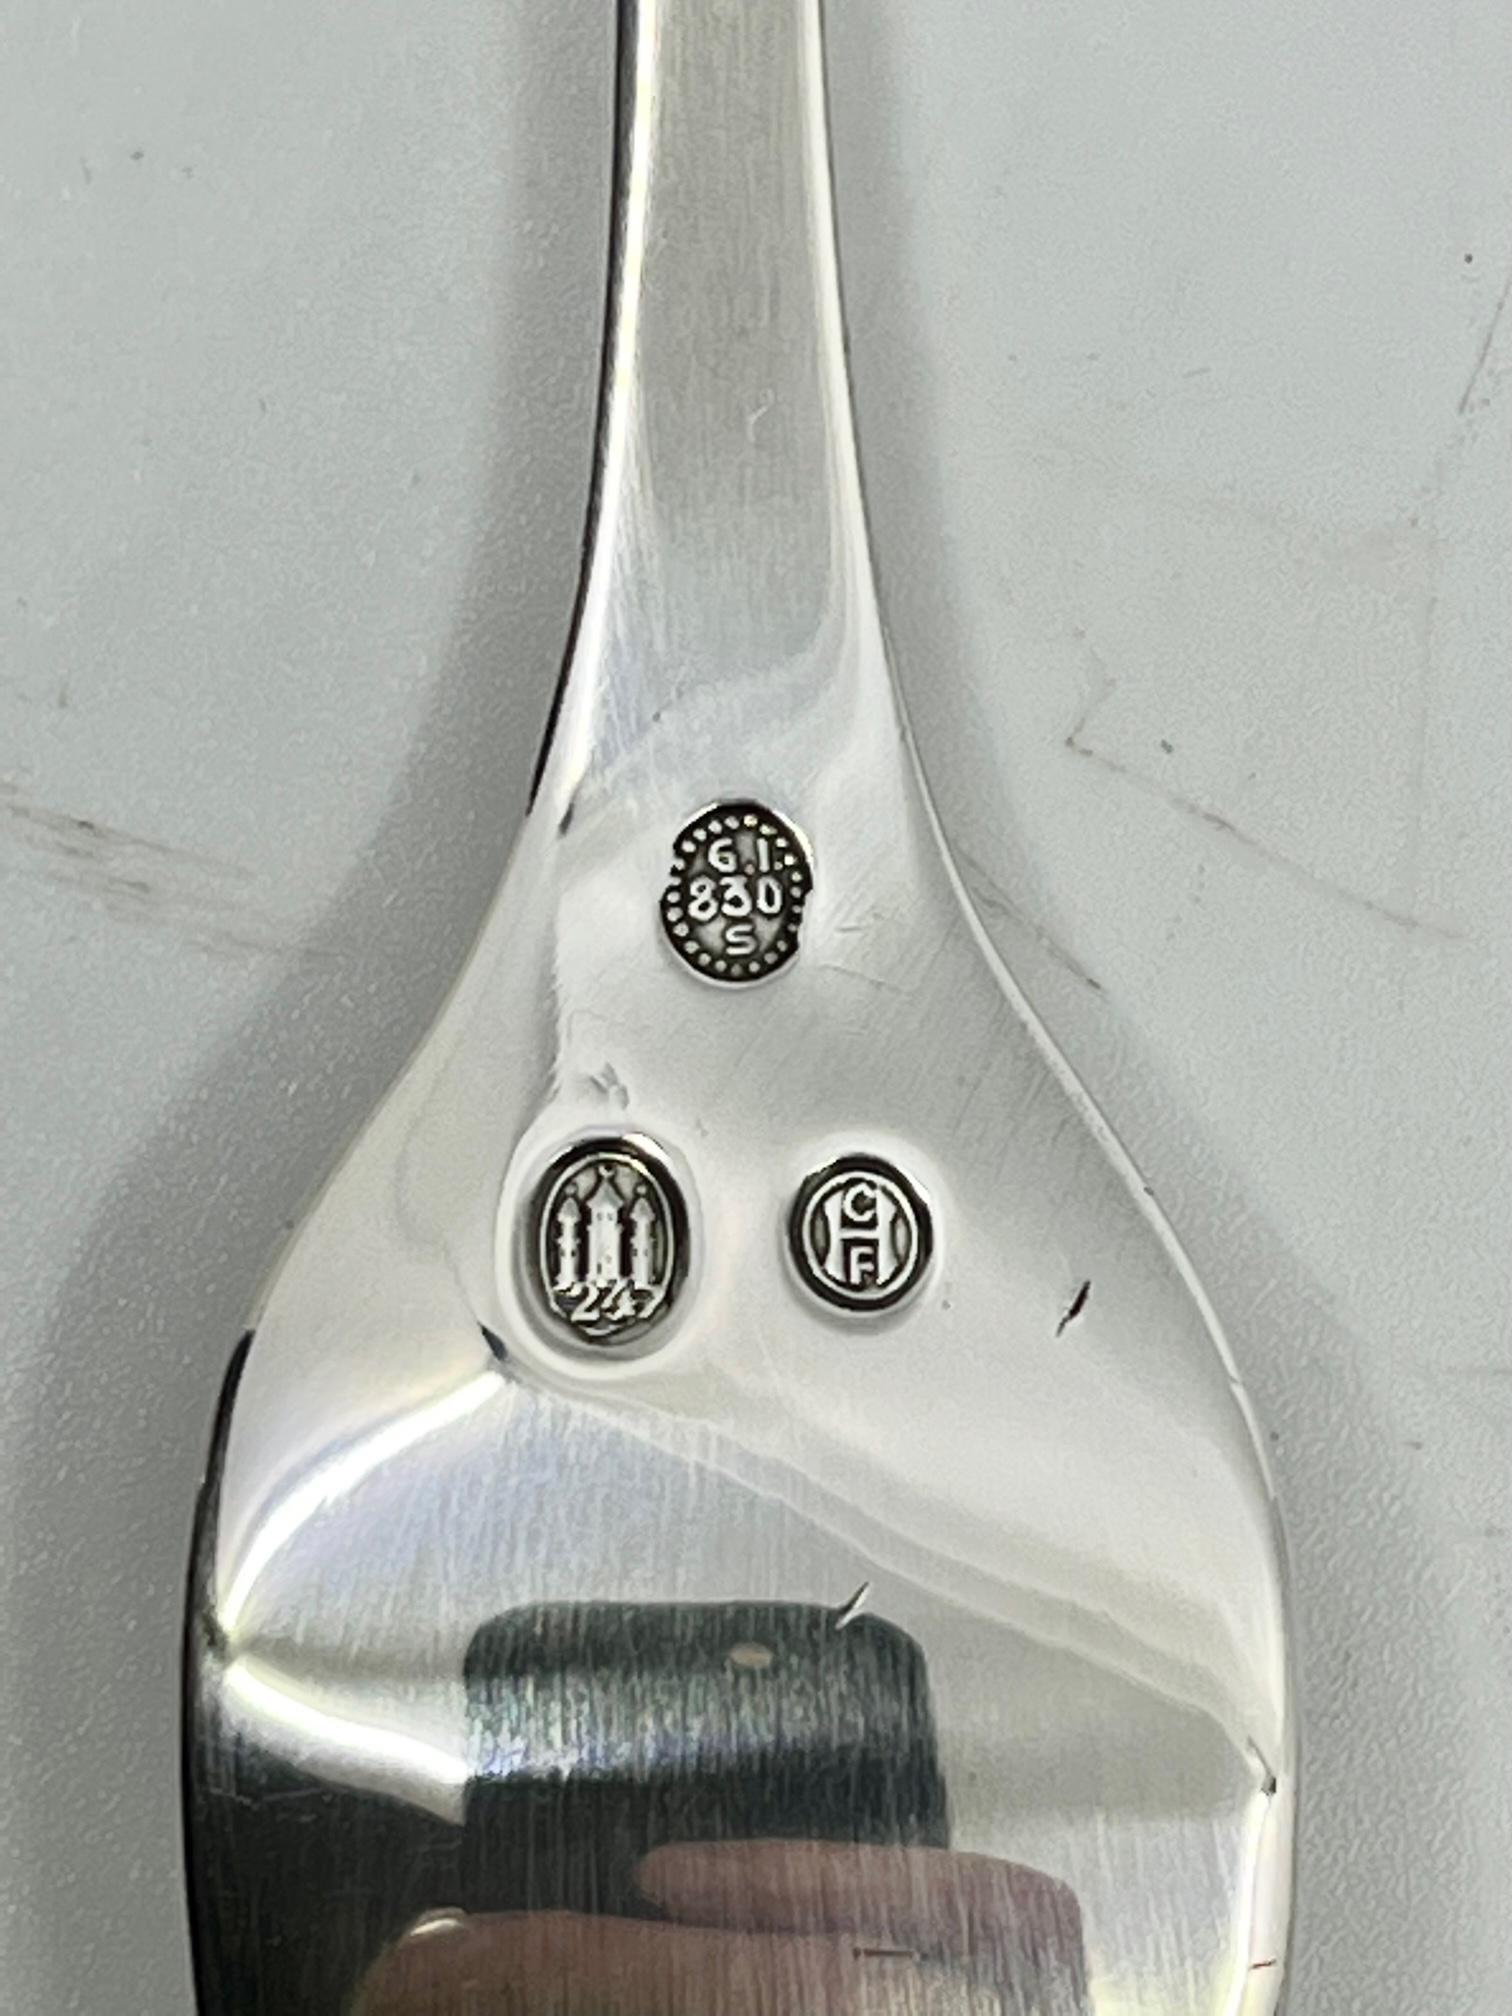 A rare Georg Jensen silver fish fork, item #061 in the Akkeleje pattern, design #77 by Georg Jensen from 1918. There is no English name for this pattern.

Additional information:
Material: Sterling silver
Styles: Art Nouveau
Hallmarks: With period